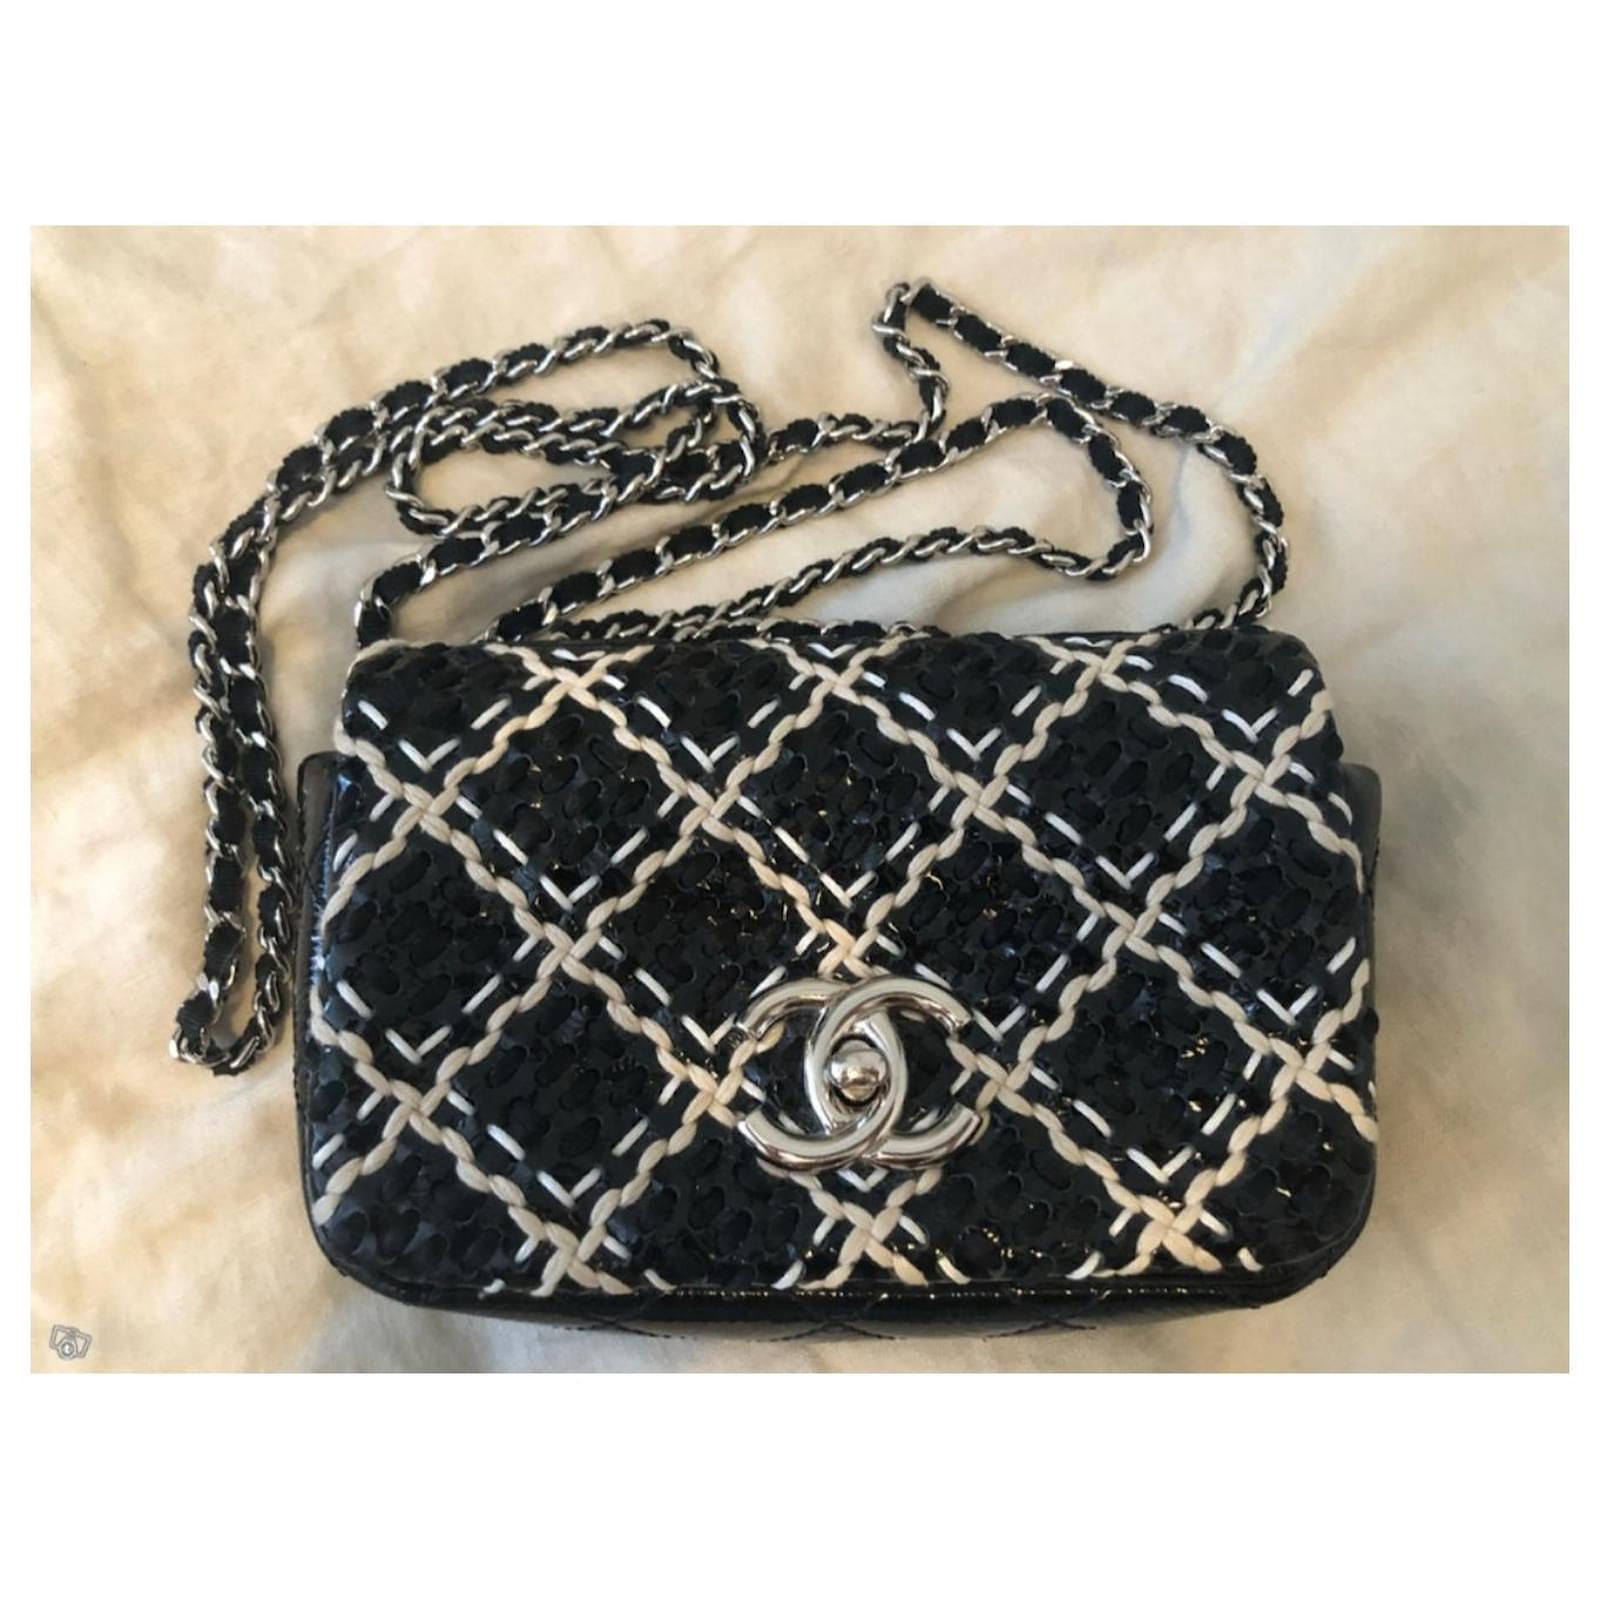 Handbags Chanel Chanel Mini Flap Bag in Black Patent Braided Leather